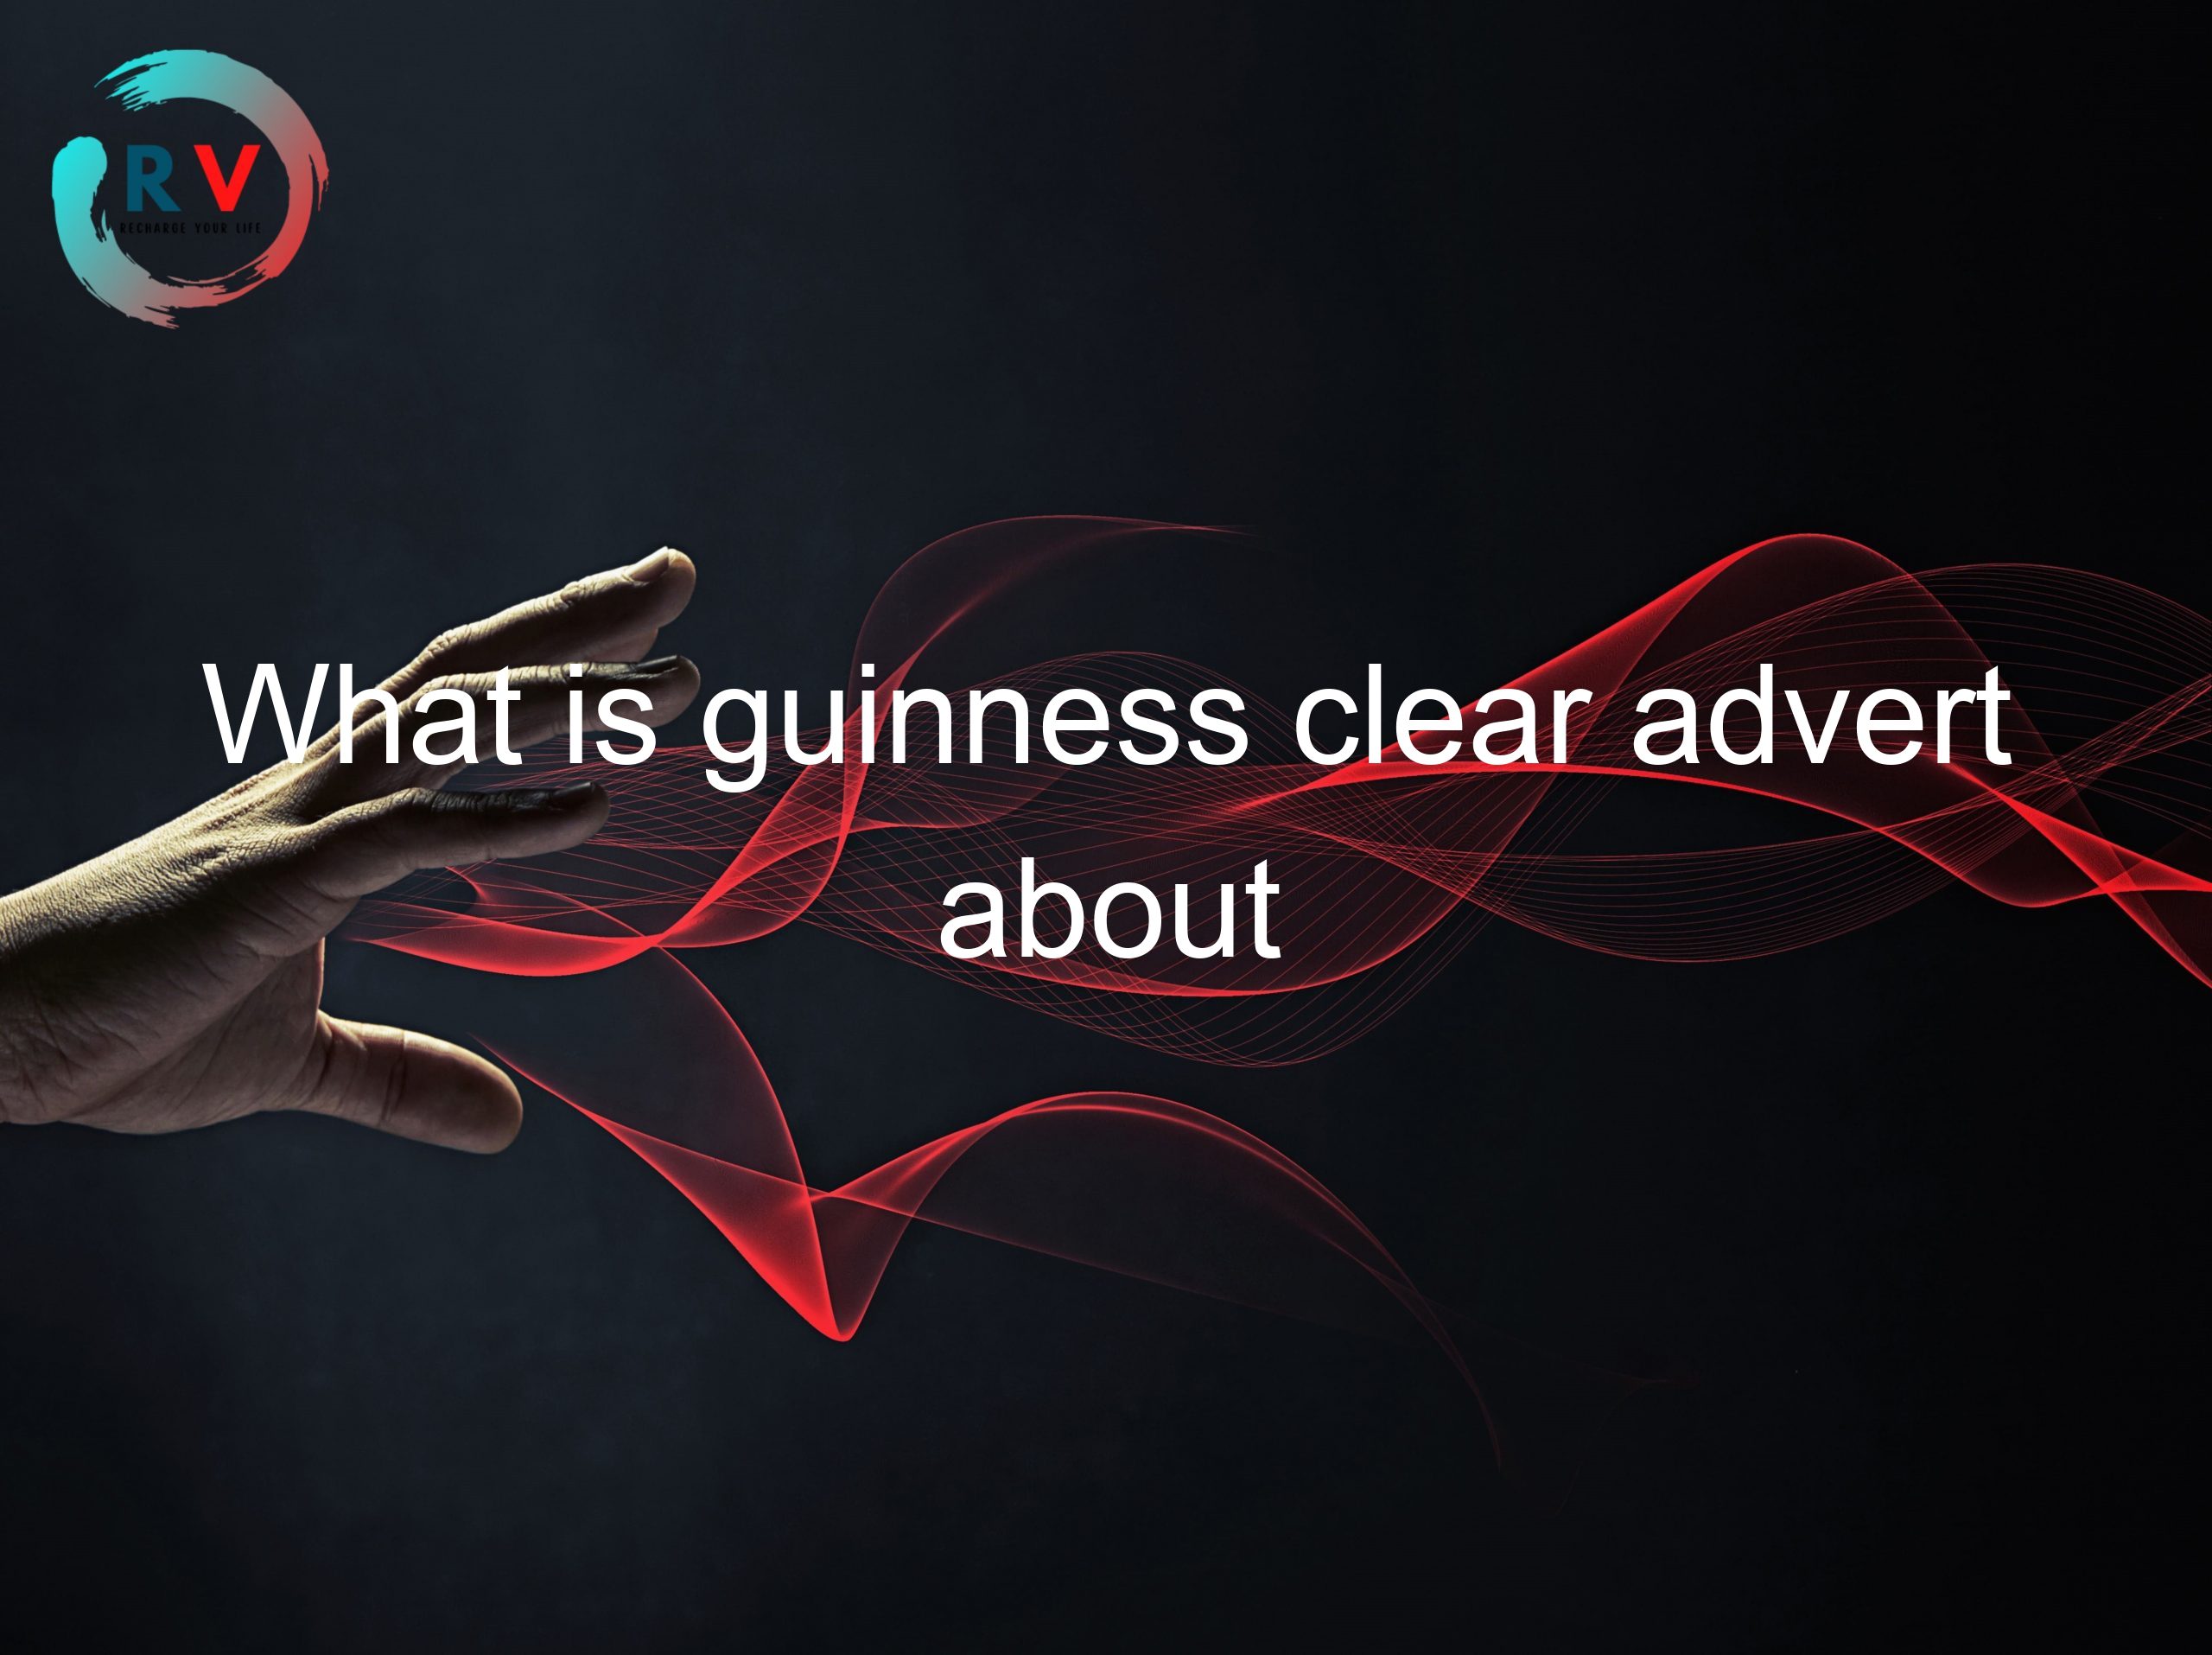 What is guinness clear advert about